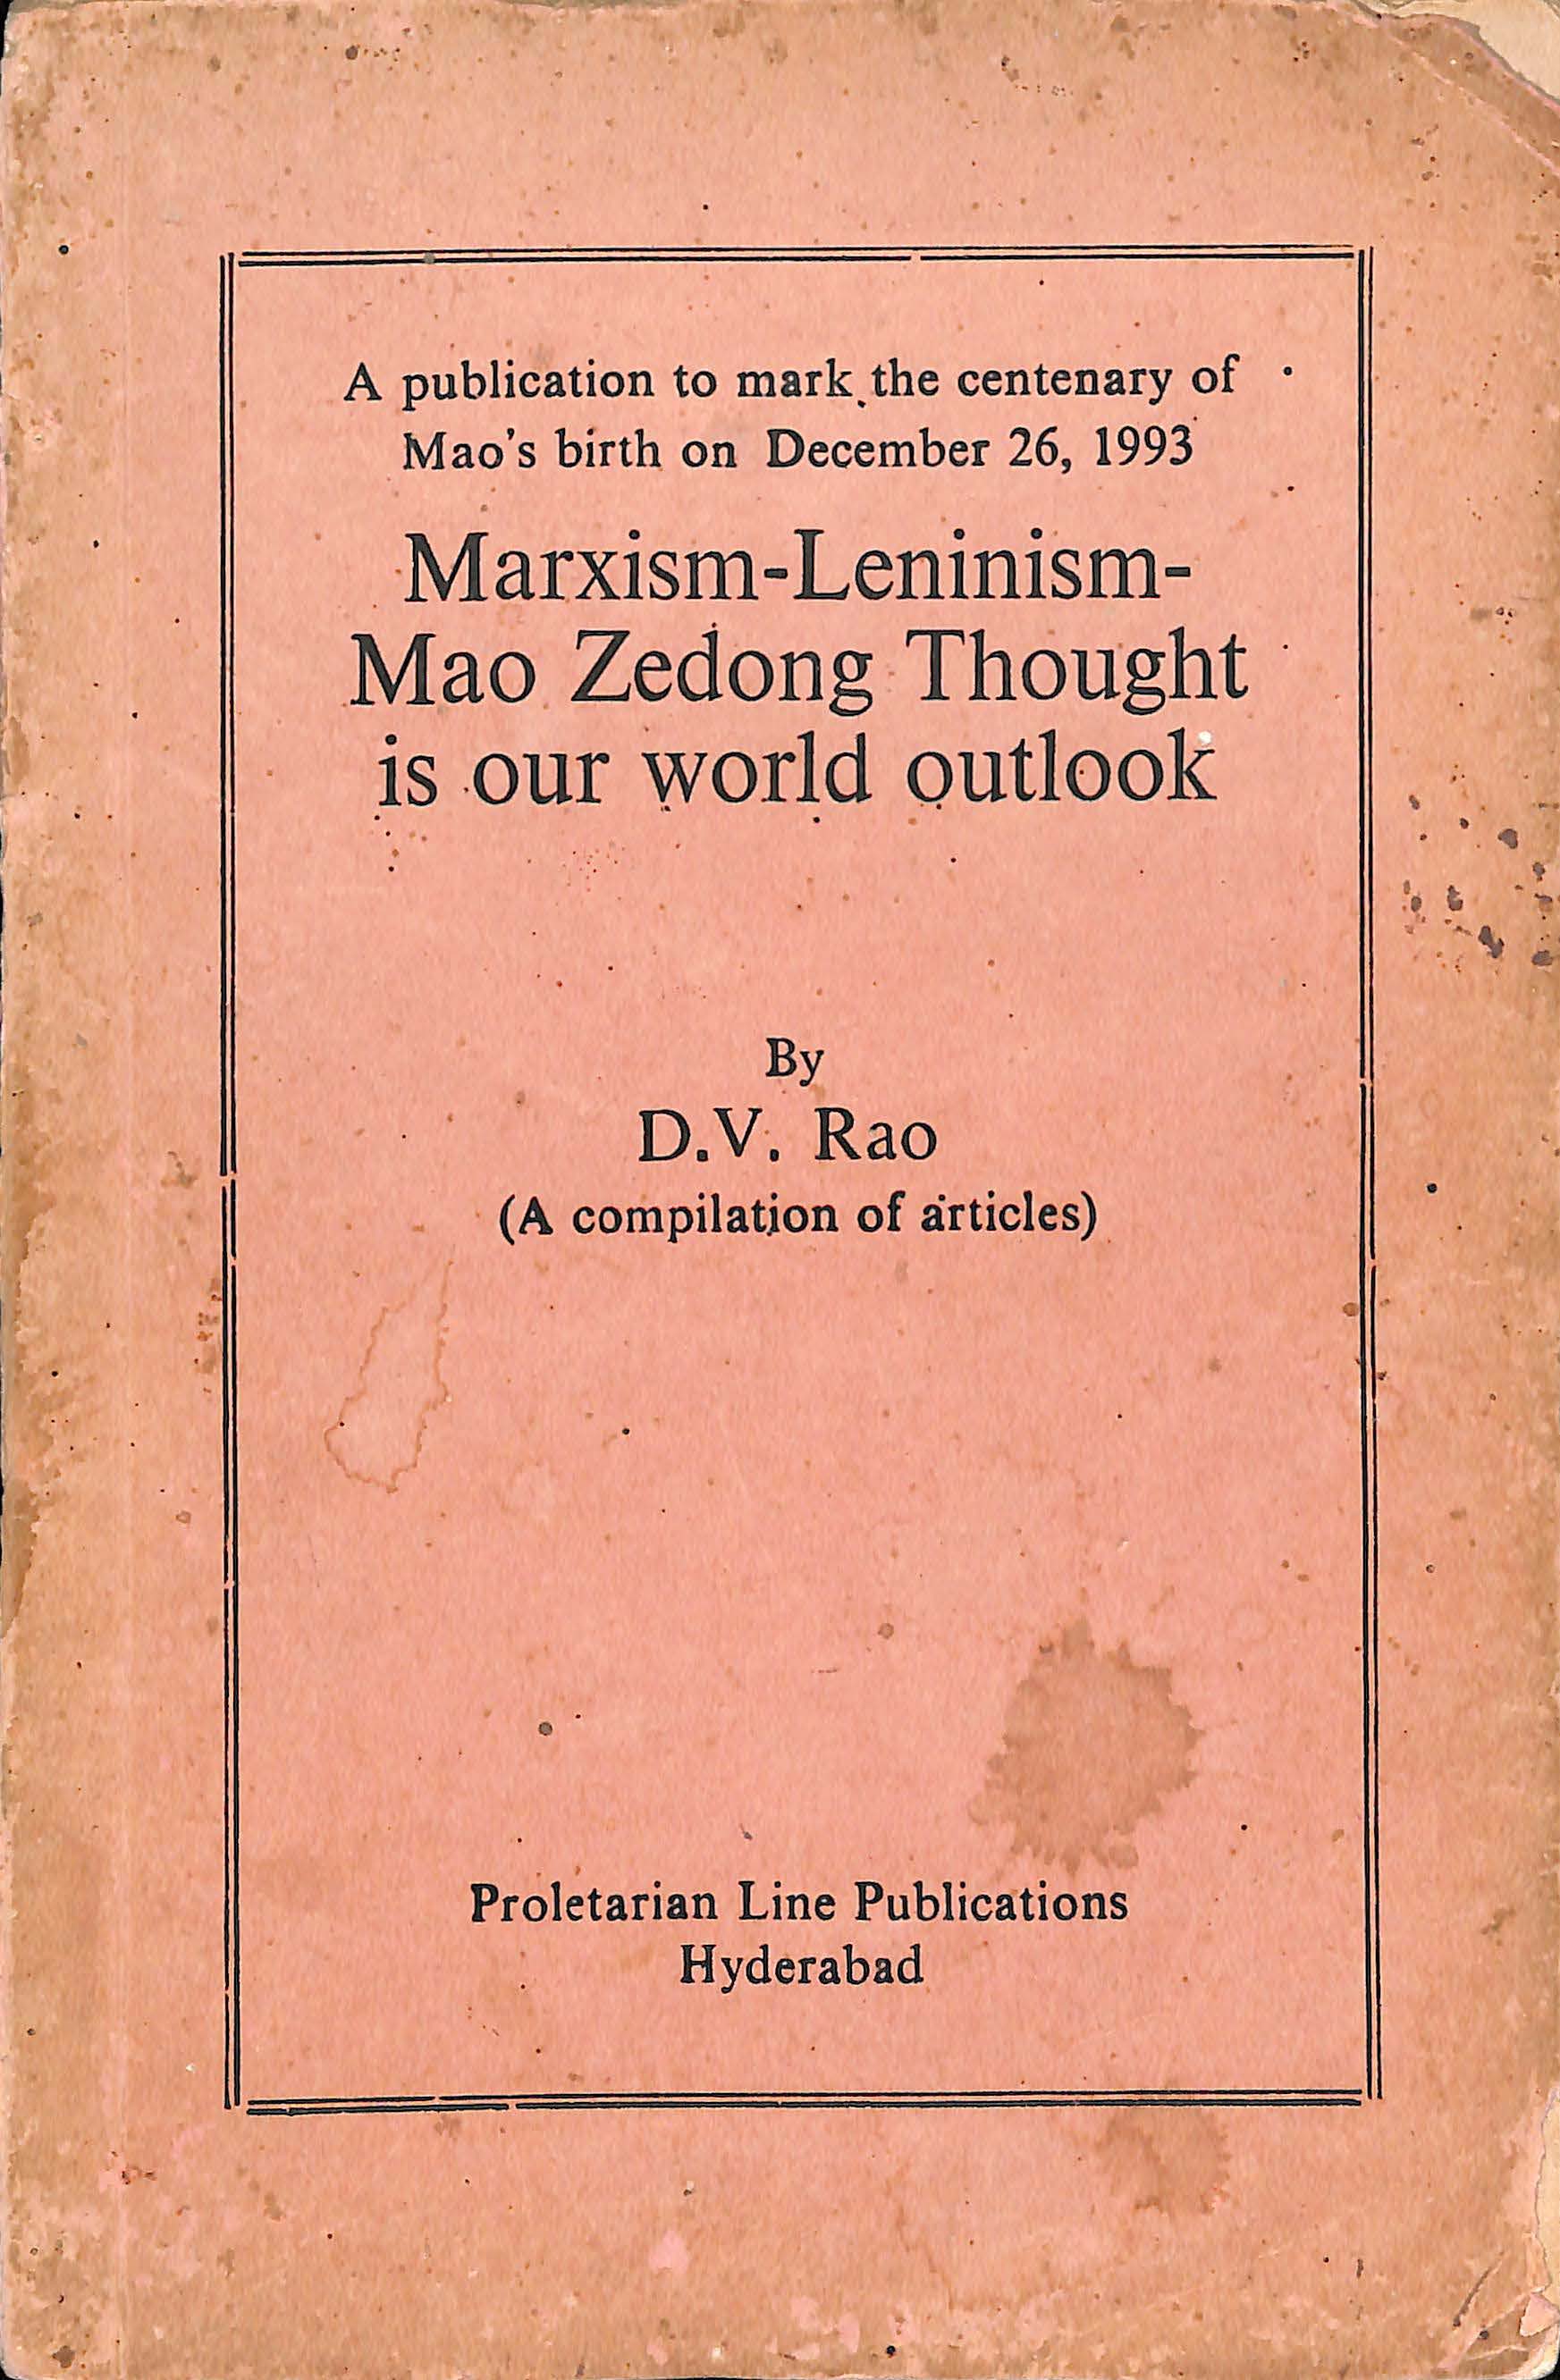 Marxism-Leninism - Mao Zedong Thought Is Our World Outlook 